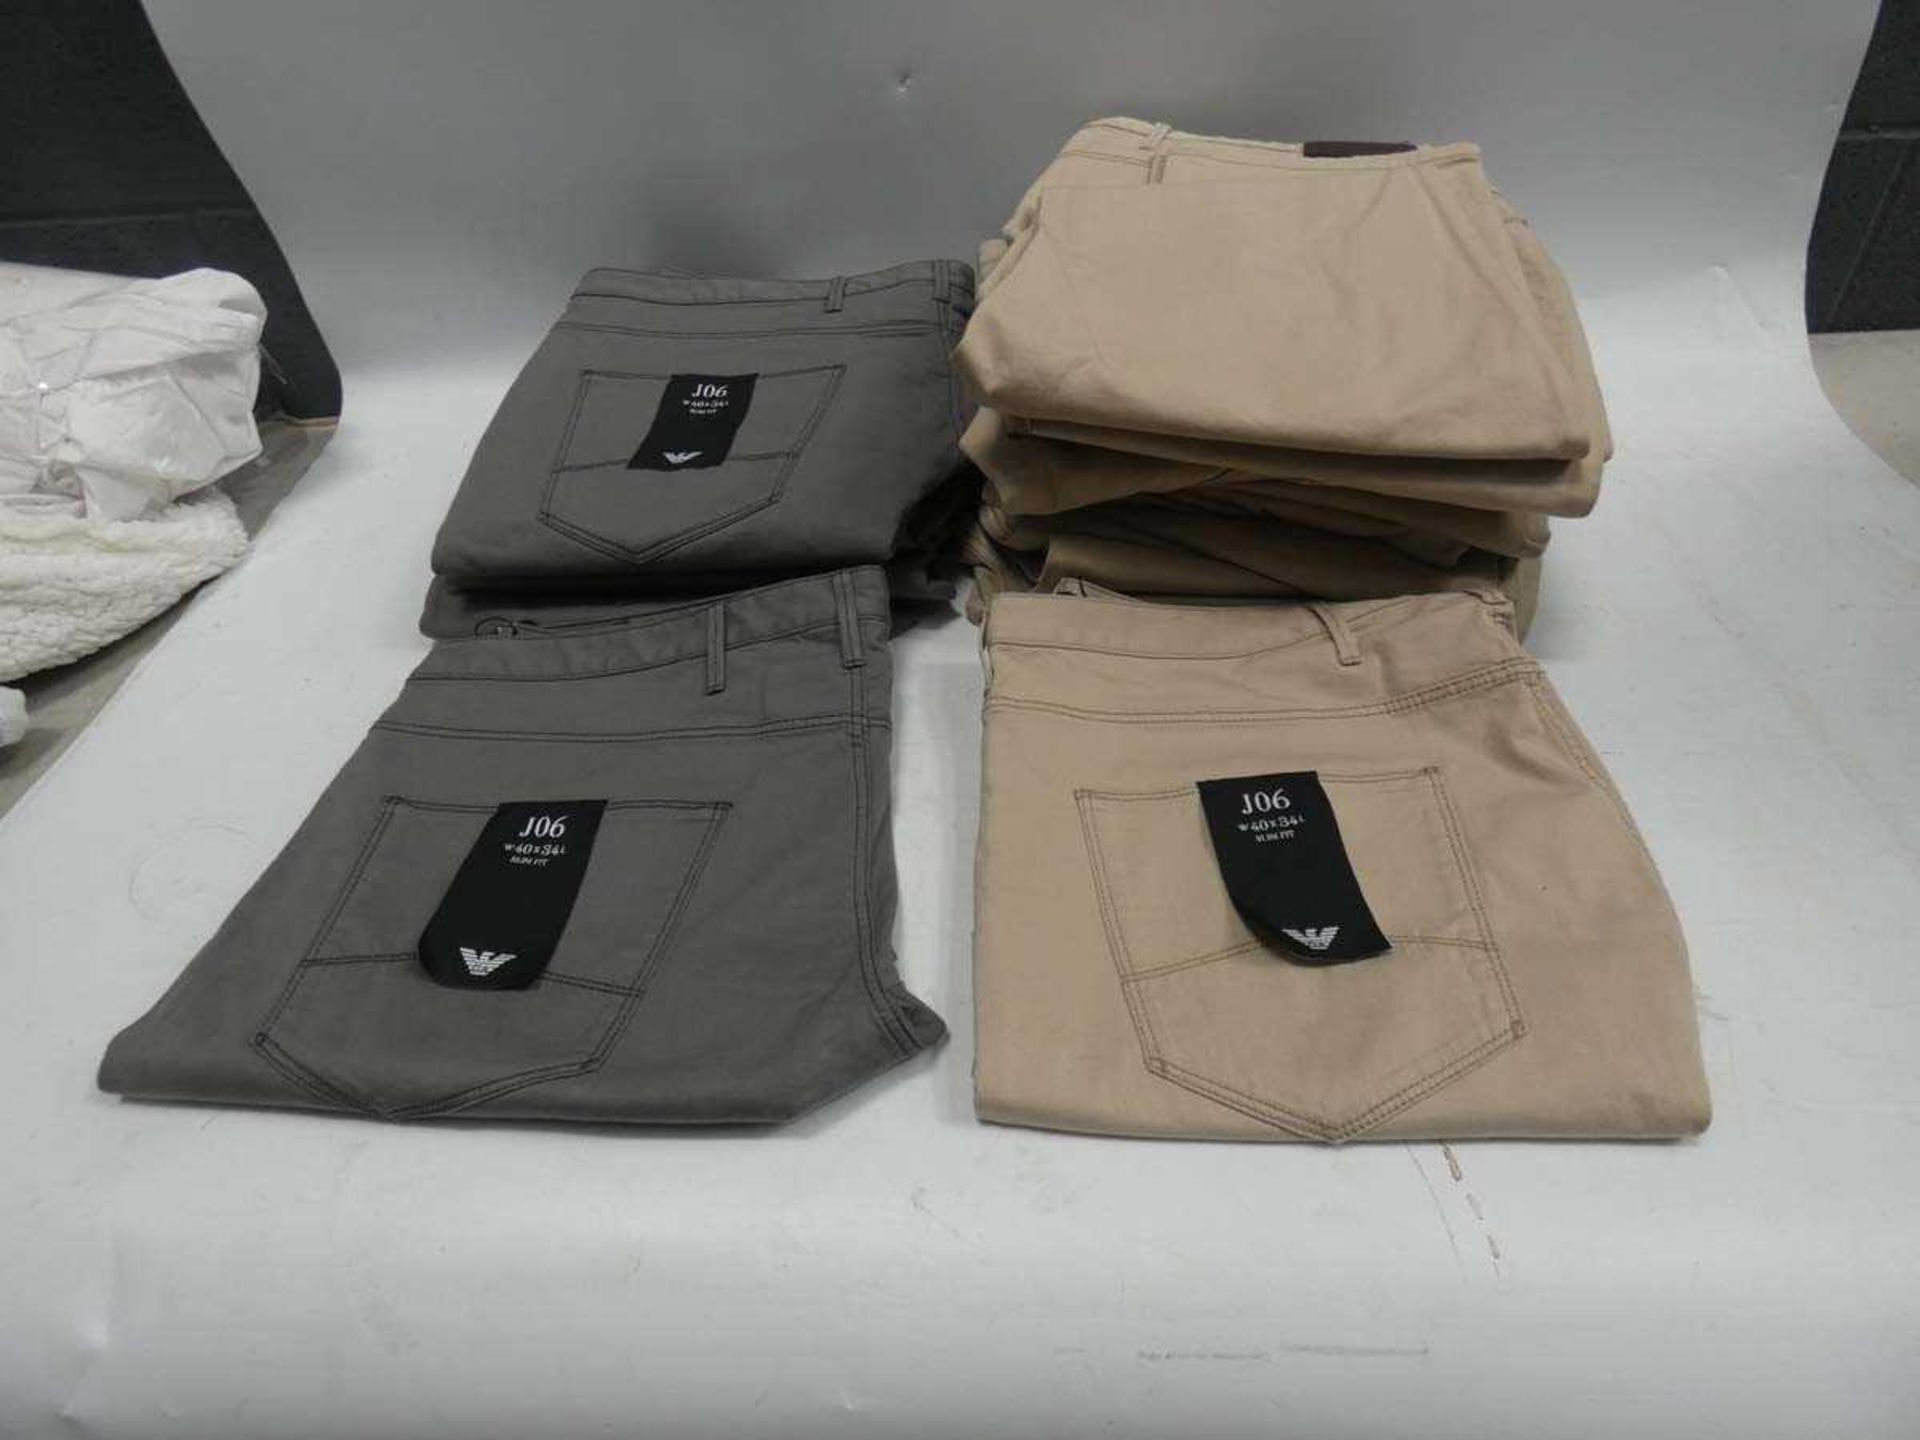 +VAT Bag containing 20 Armani chinos, 7 in light grey and 13 in beige, various sizes ranging from